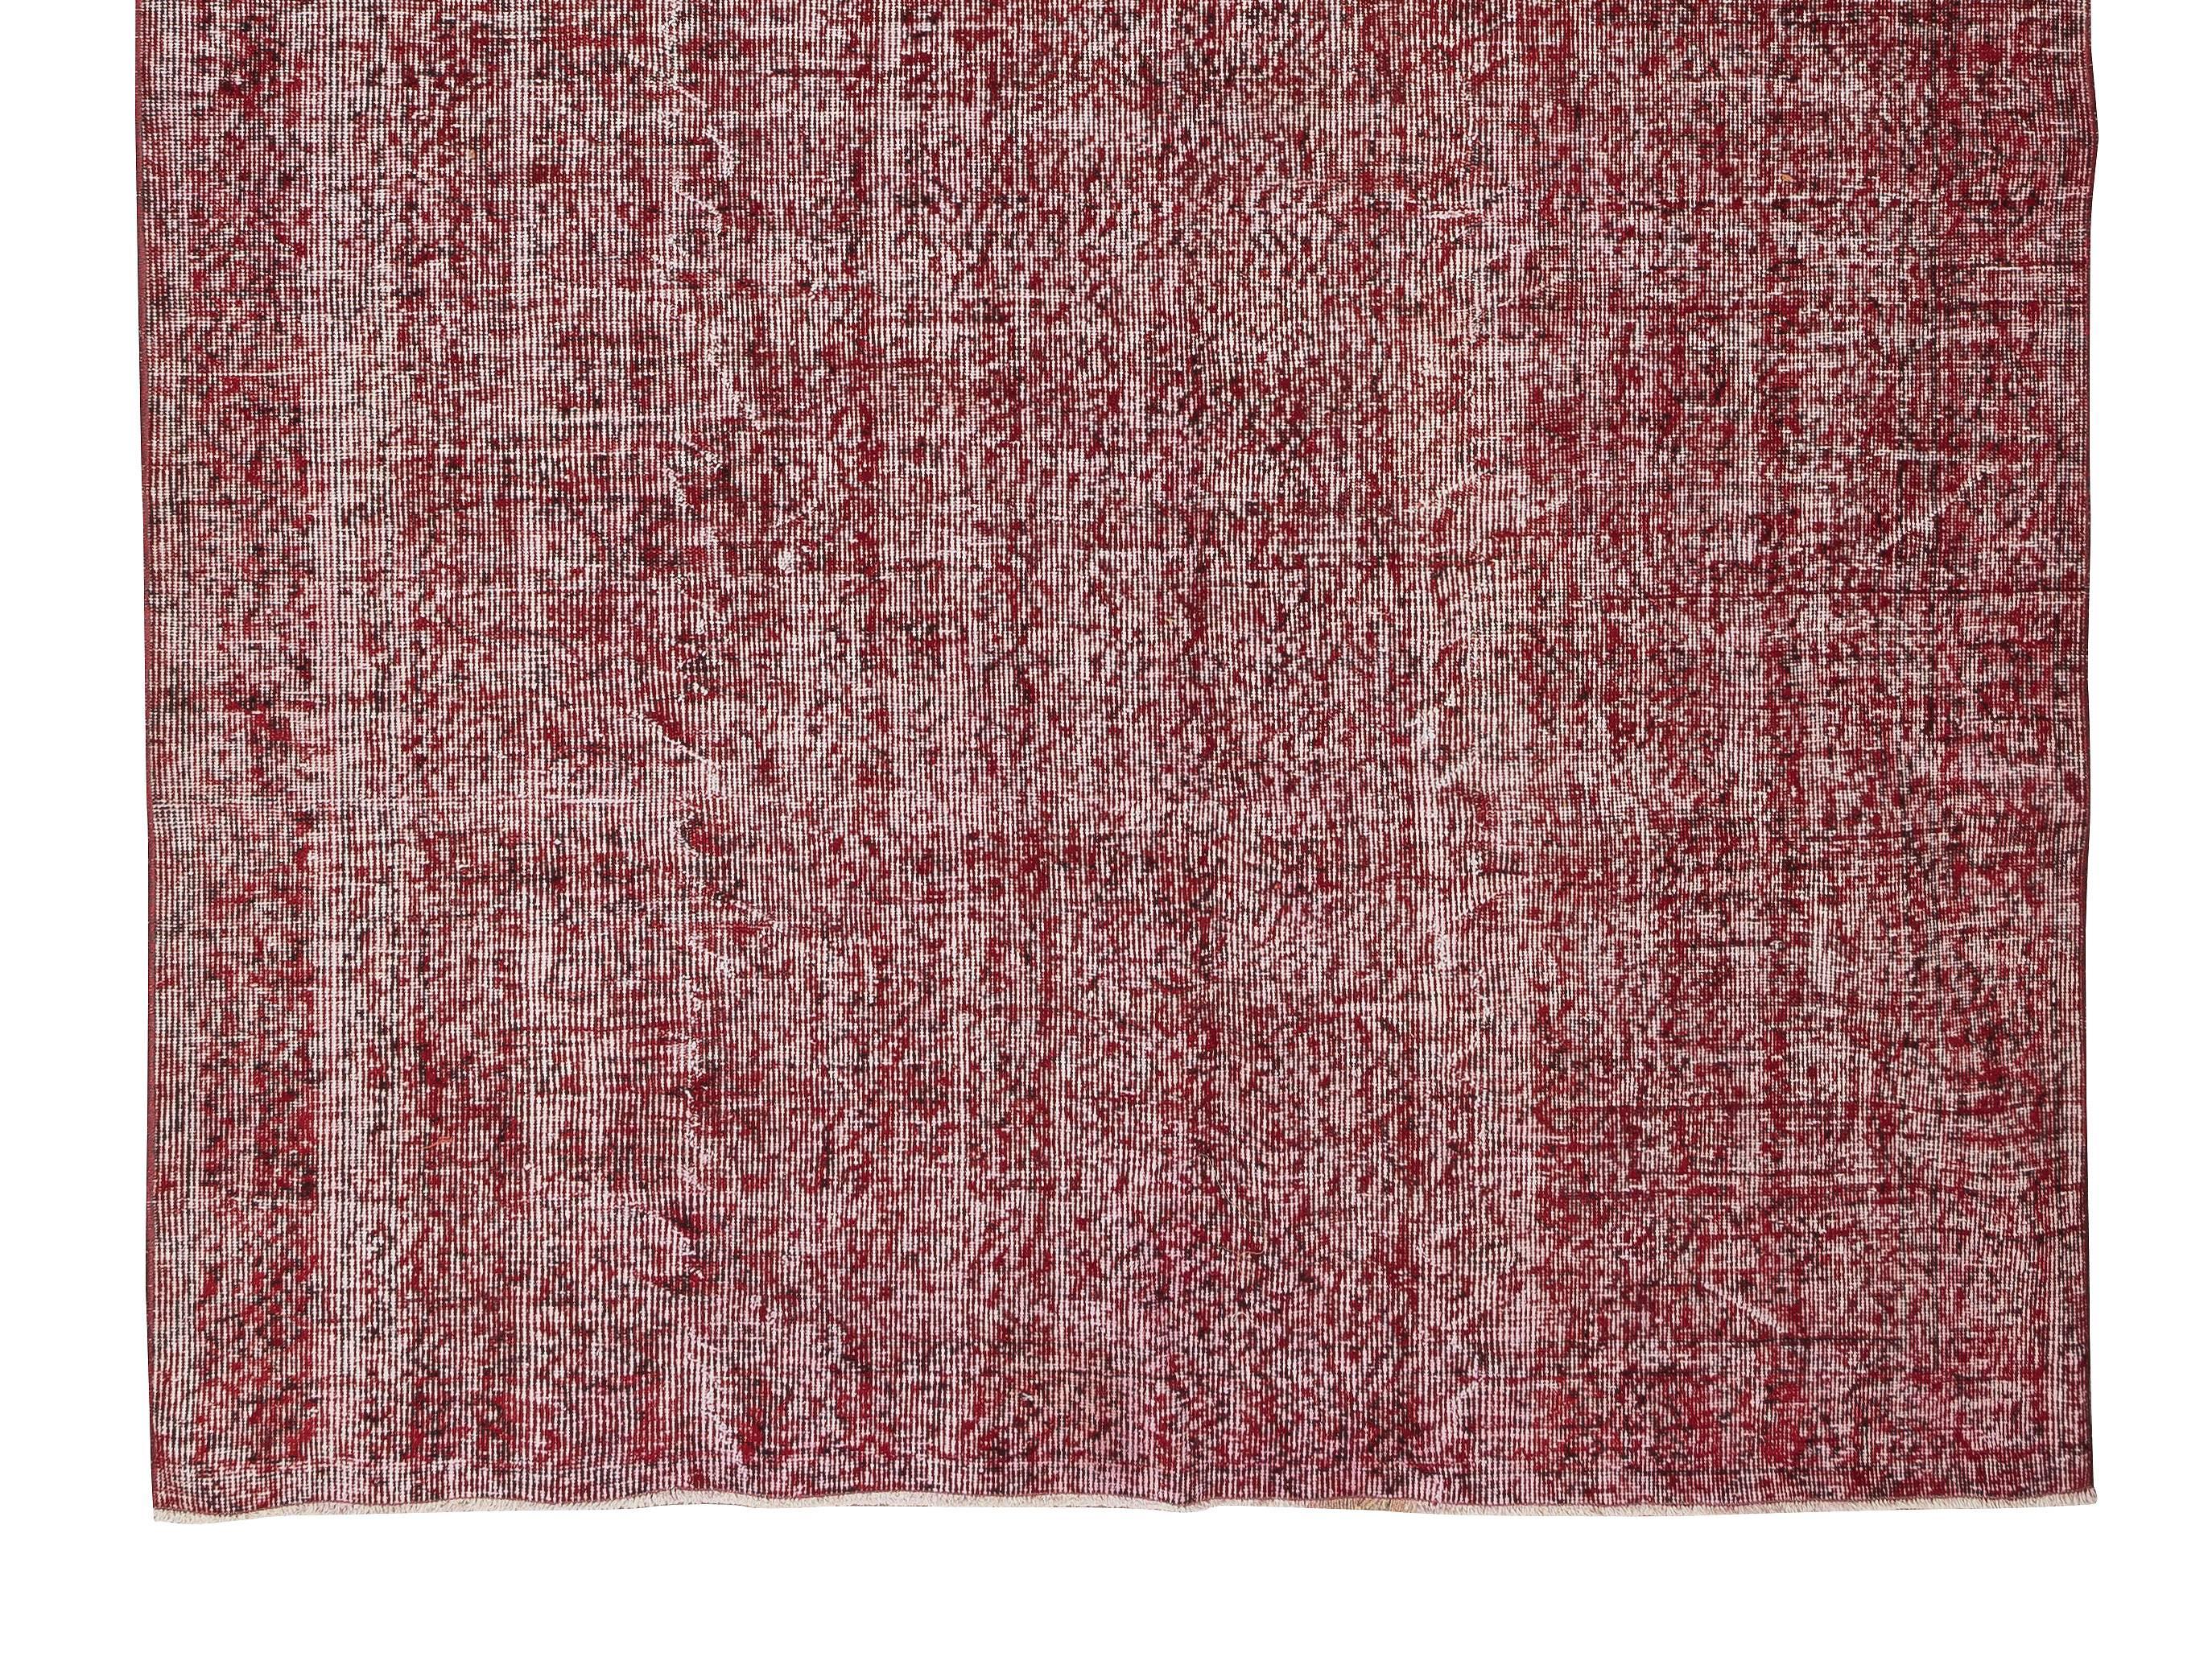 6.4x9.6 Ft Handmade Turkish Vintage Distressed Wool Area Rug in Burgundy Red In Good Condition For Sale In Philadelphia, PA